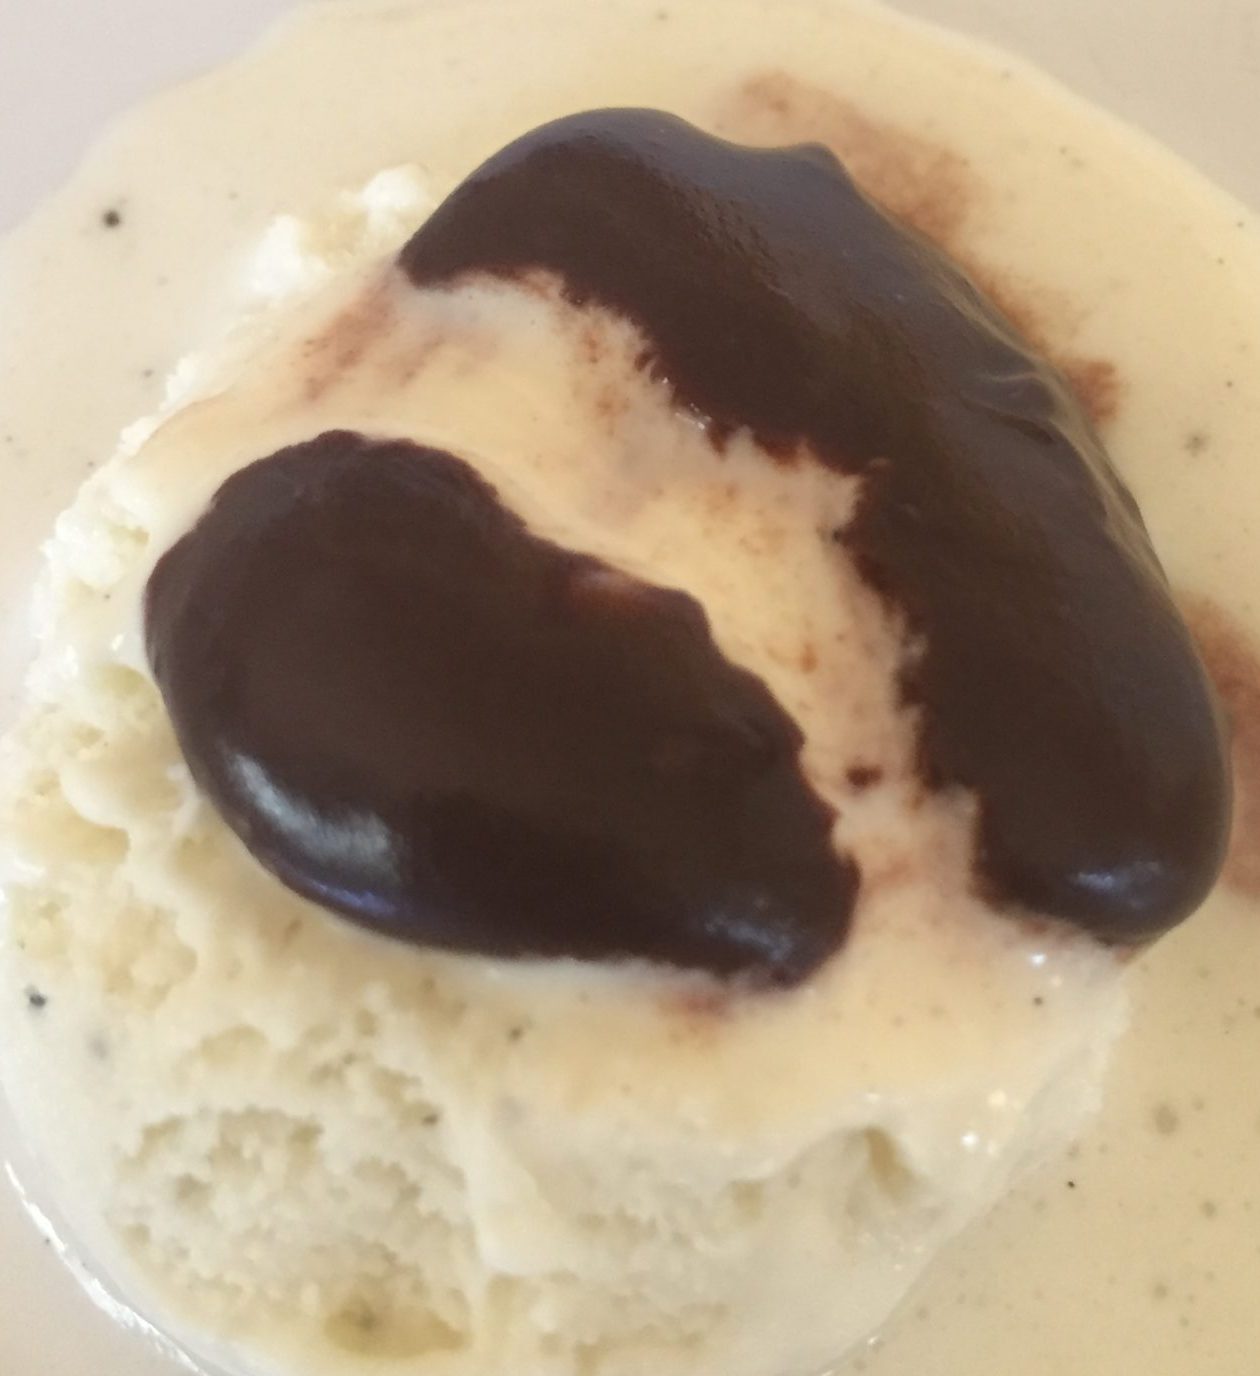 Melted Chocolate (with milk) sauce on ice cream.